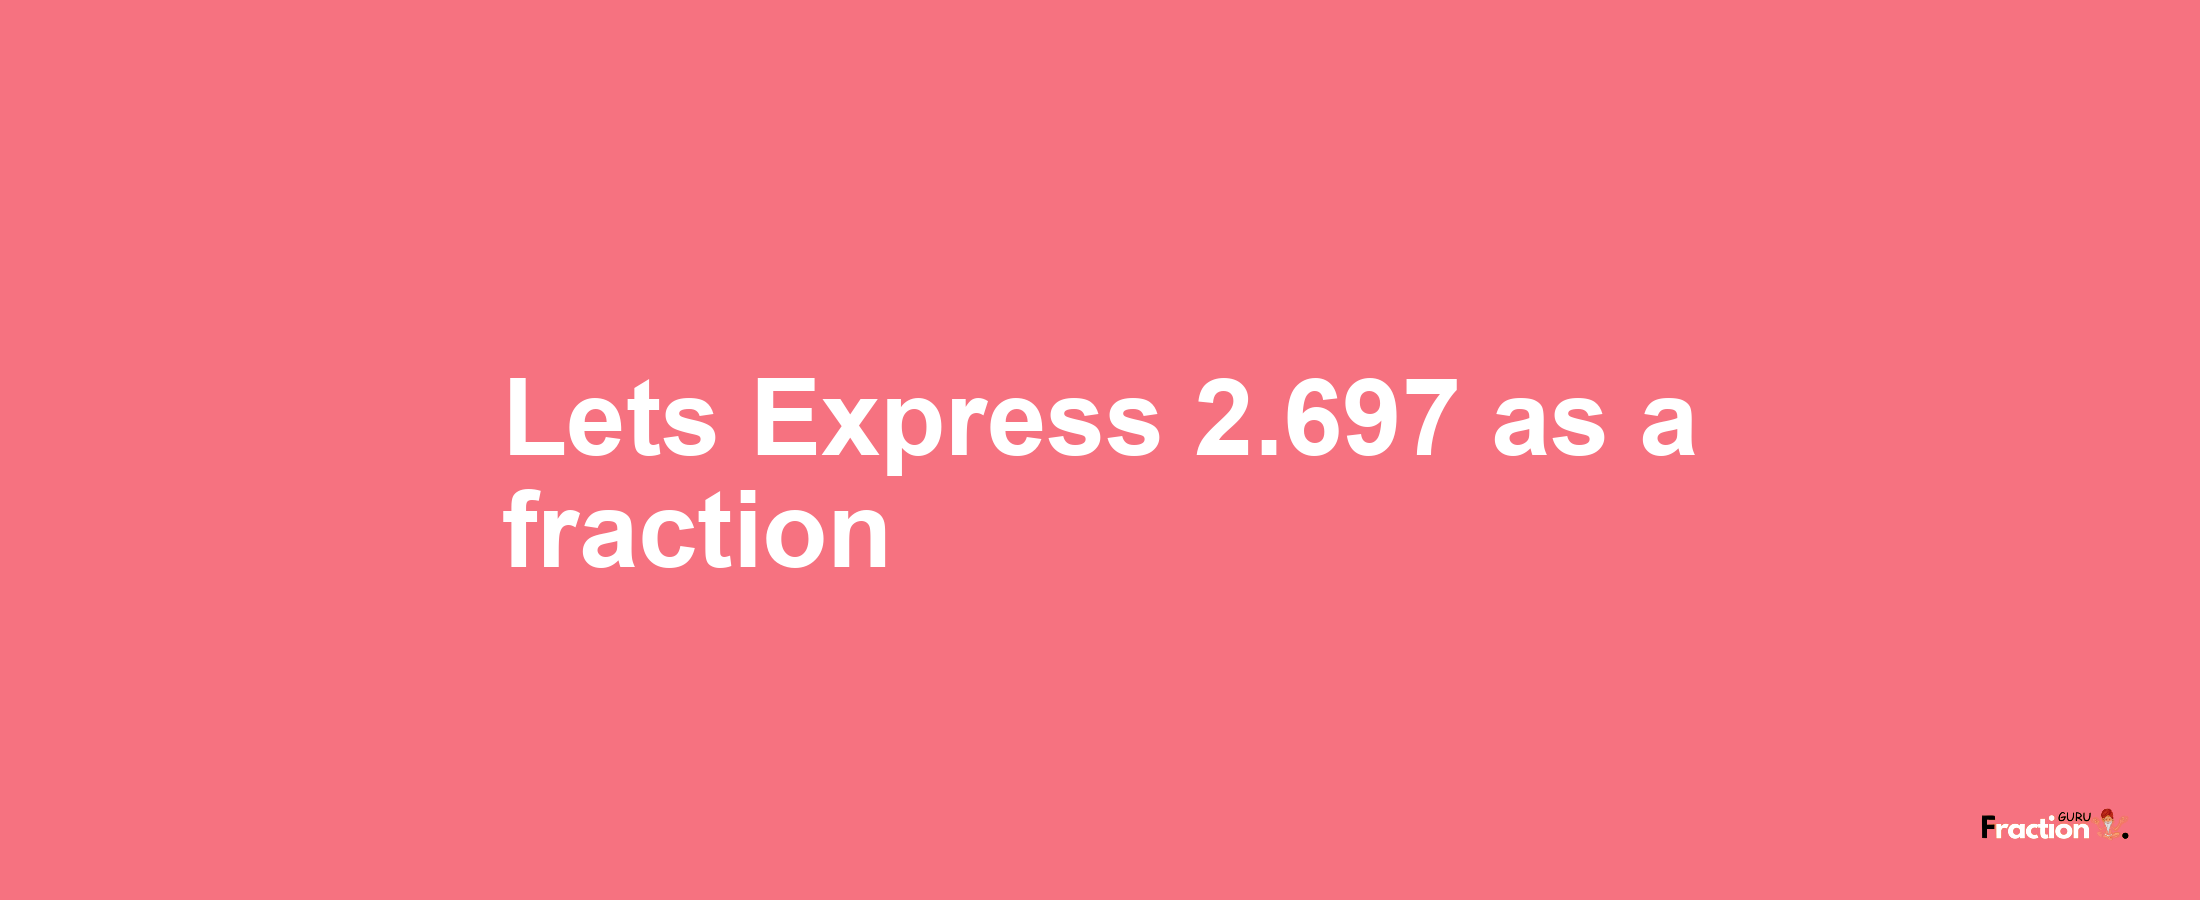 Lets Express 2.697 as afraction